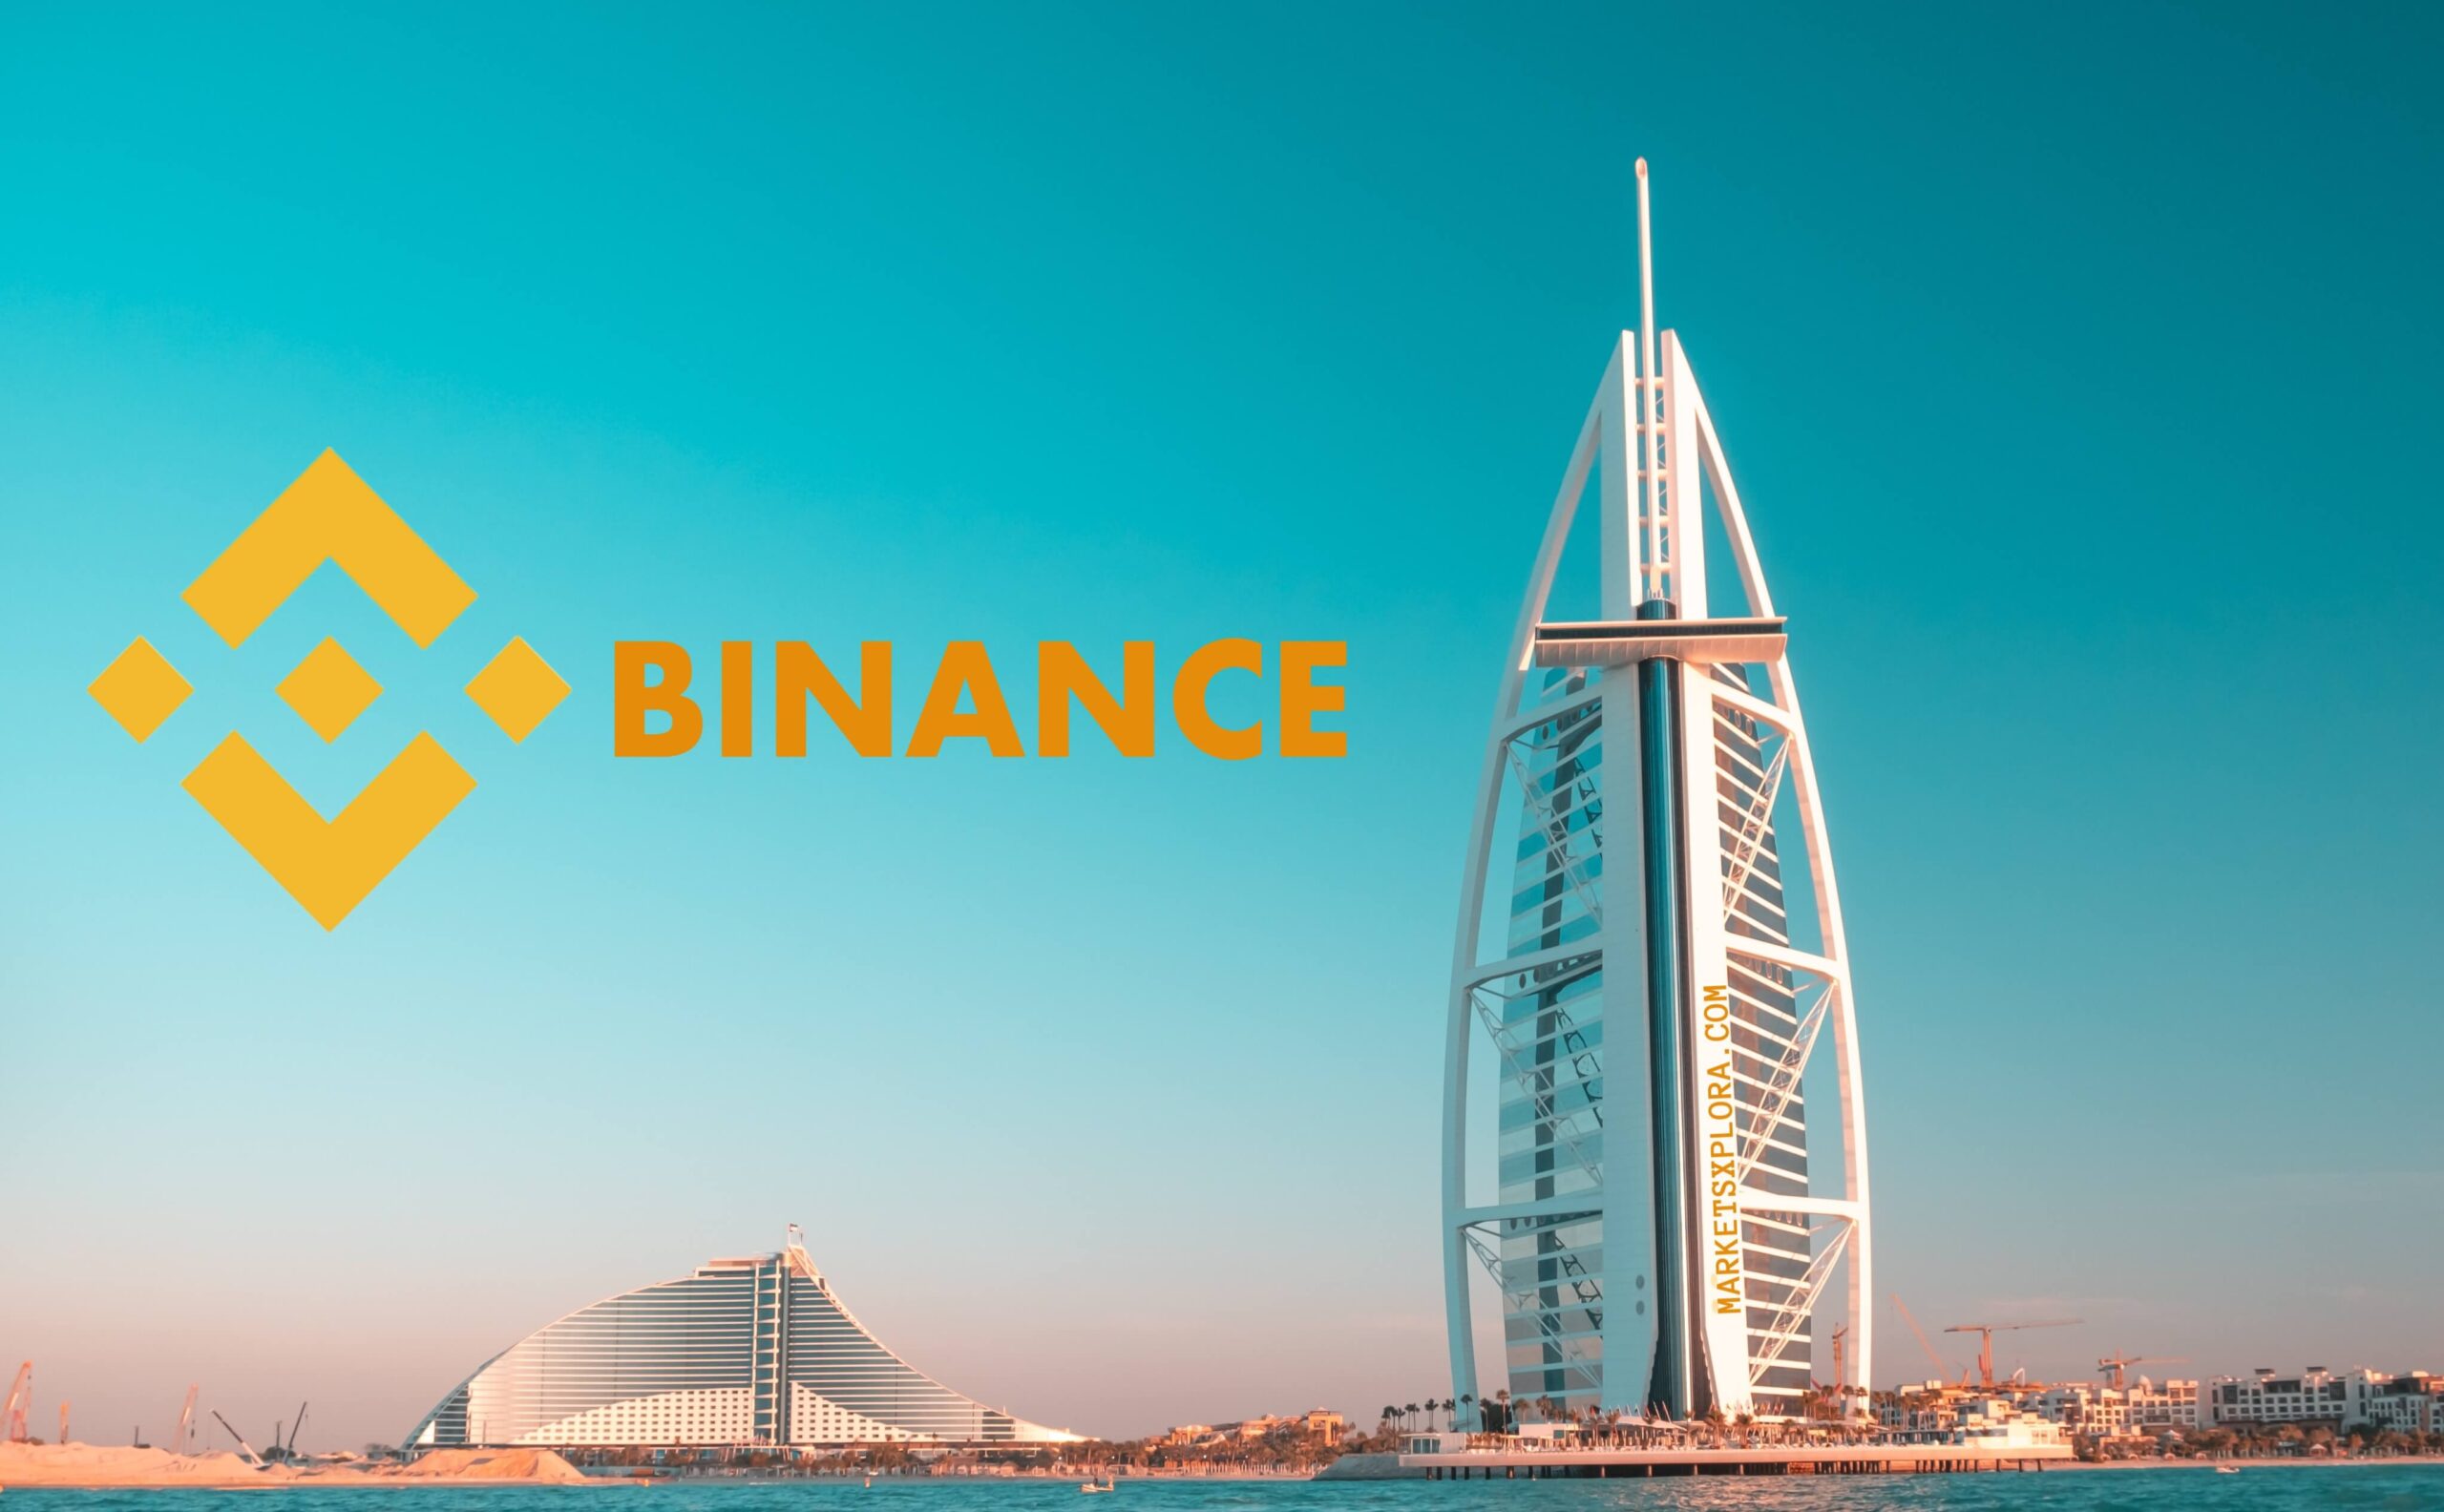 Binance FZE, a subsidiary of the world's largest cryptocurrency exchange, obtains a license from Dubai's Virtual Assets Regulatory Authority (VARA) to provide exchange and broker-dealer services in Dubai.